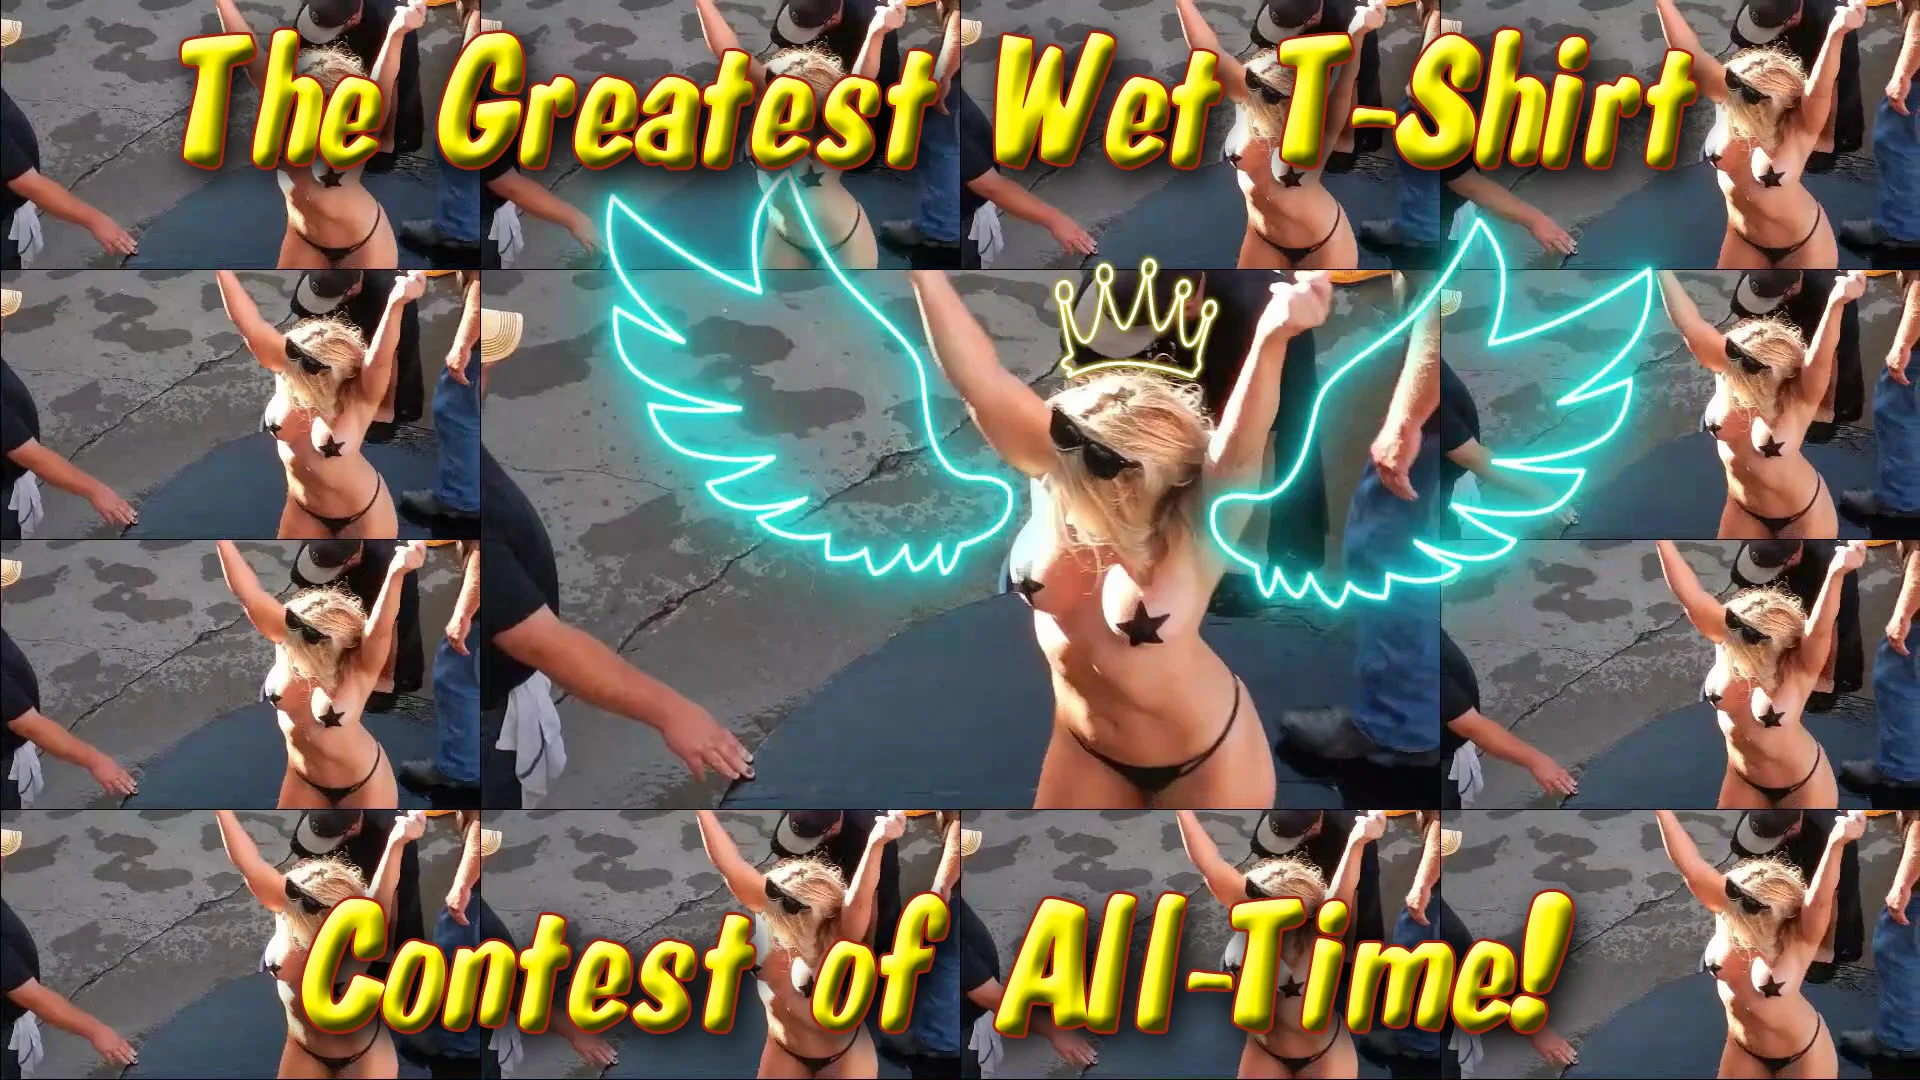 ahmed amein recommends Wet Tee Shirt Contest Video